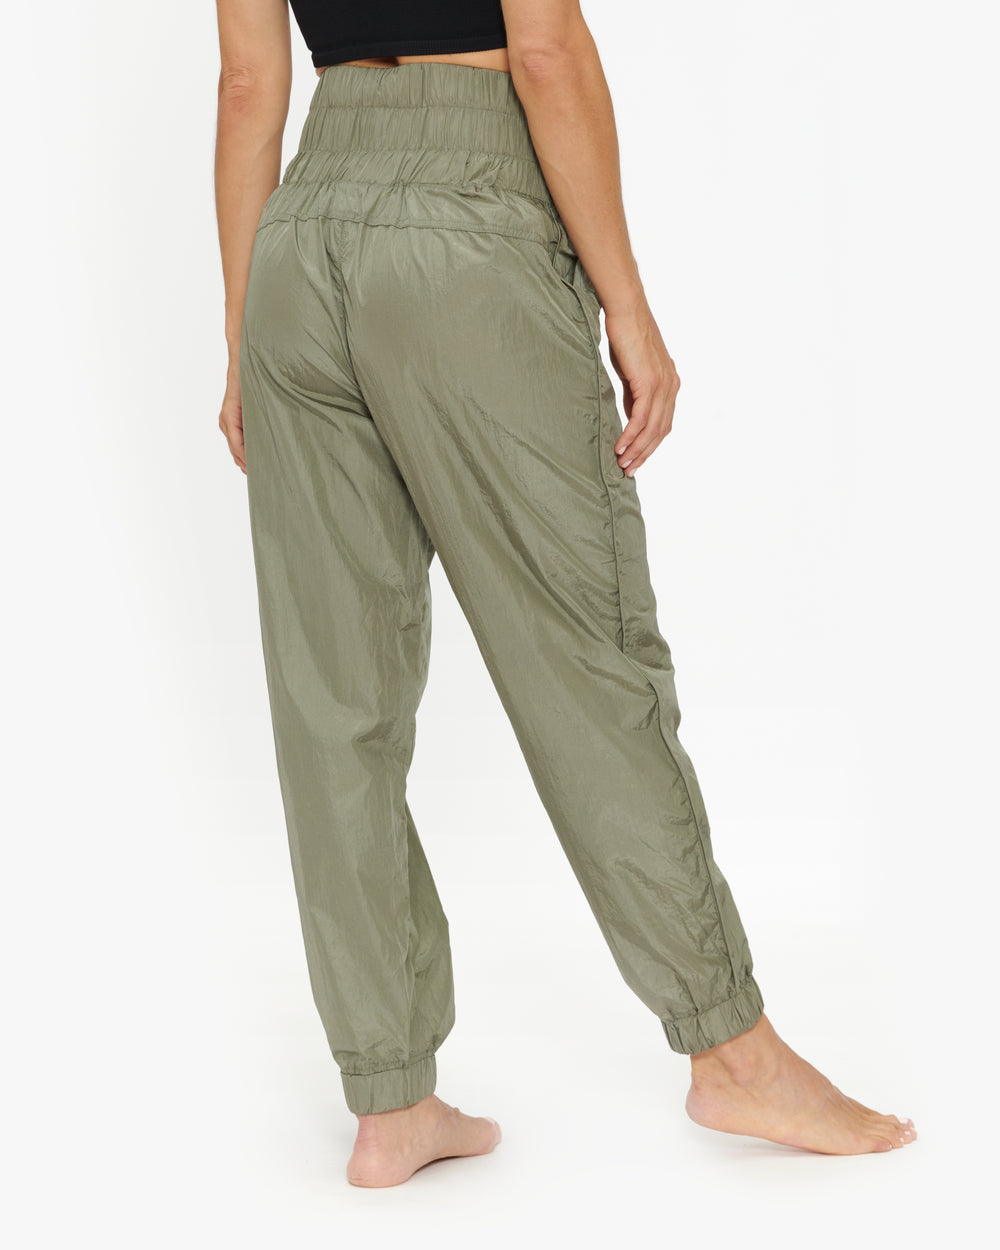 FREE PEOPLE WAY HOME JOGGER